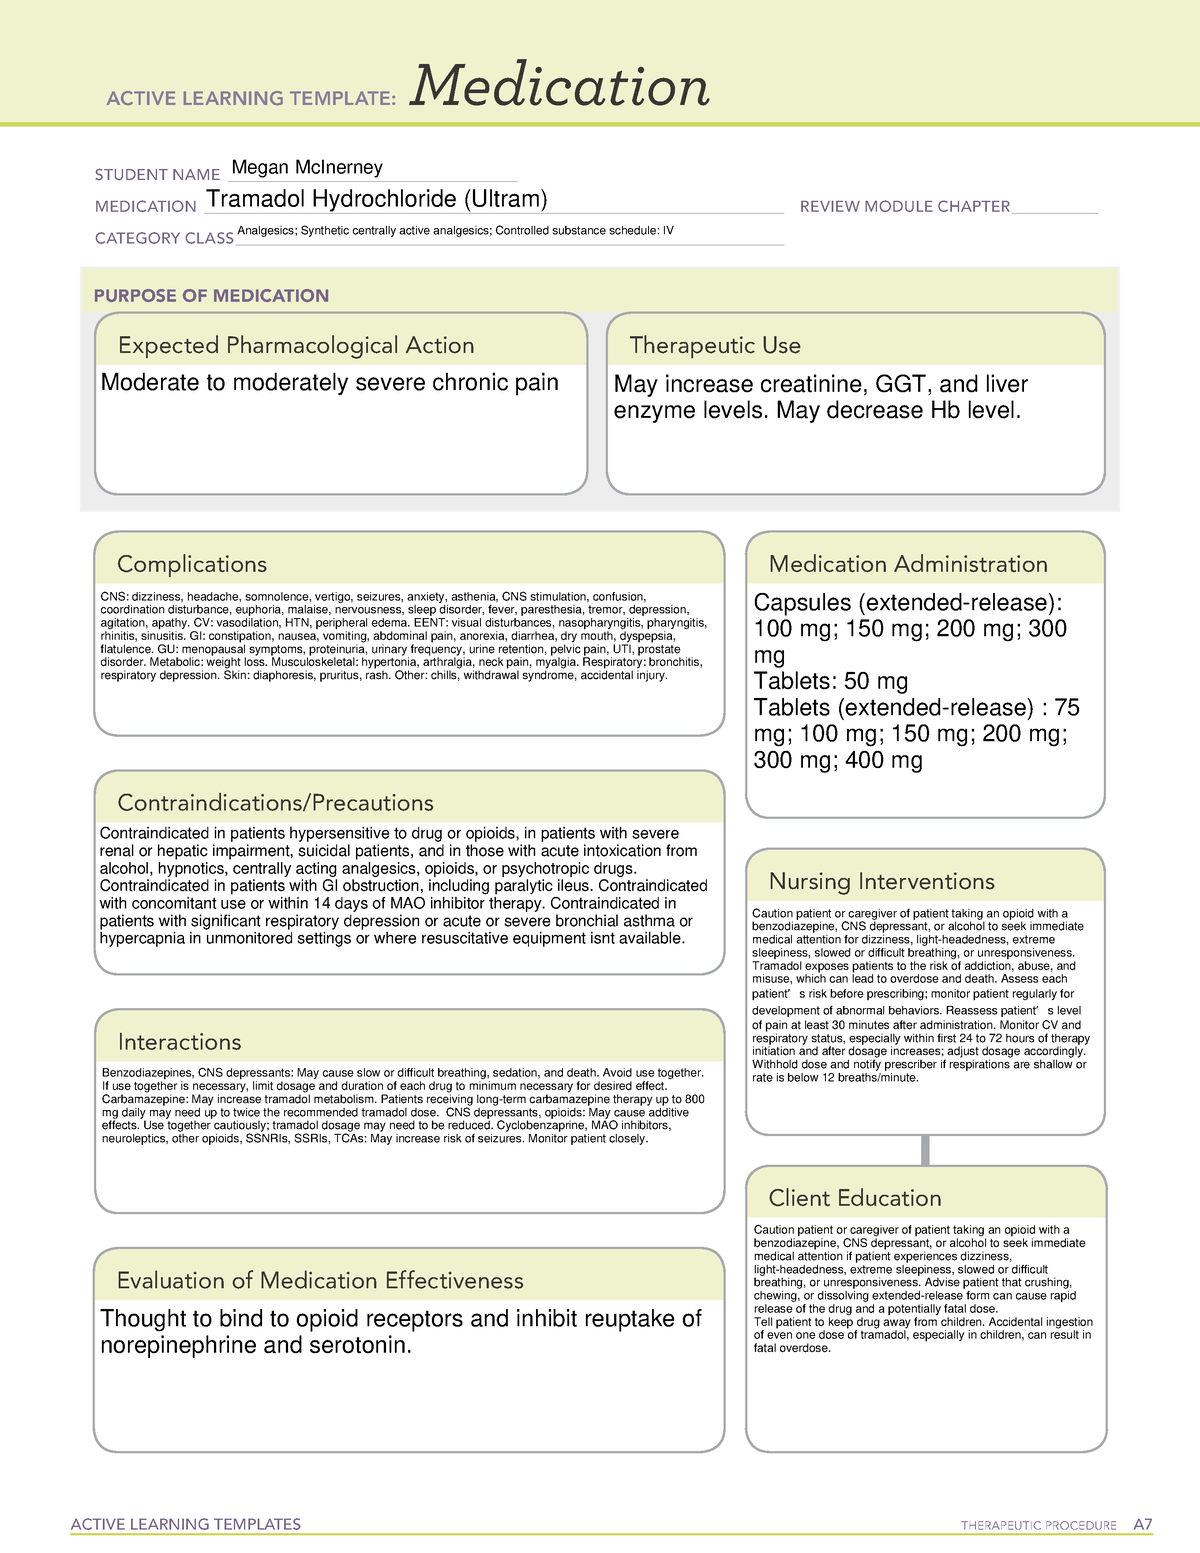 tramadol-medication-card-wk-2-active-learning-templates-therapeutic